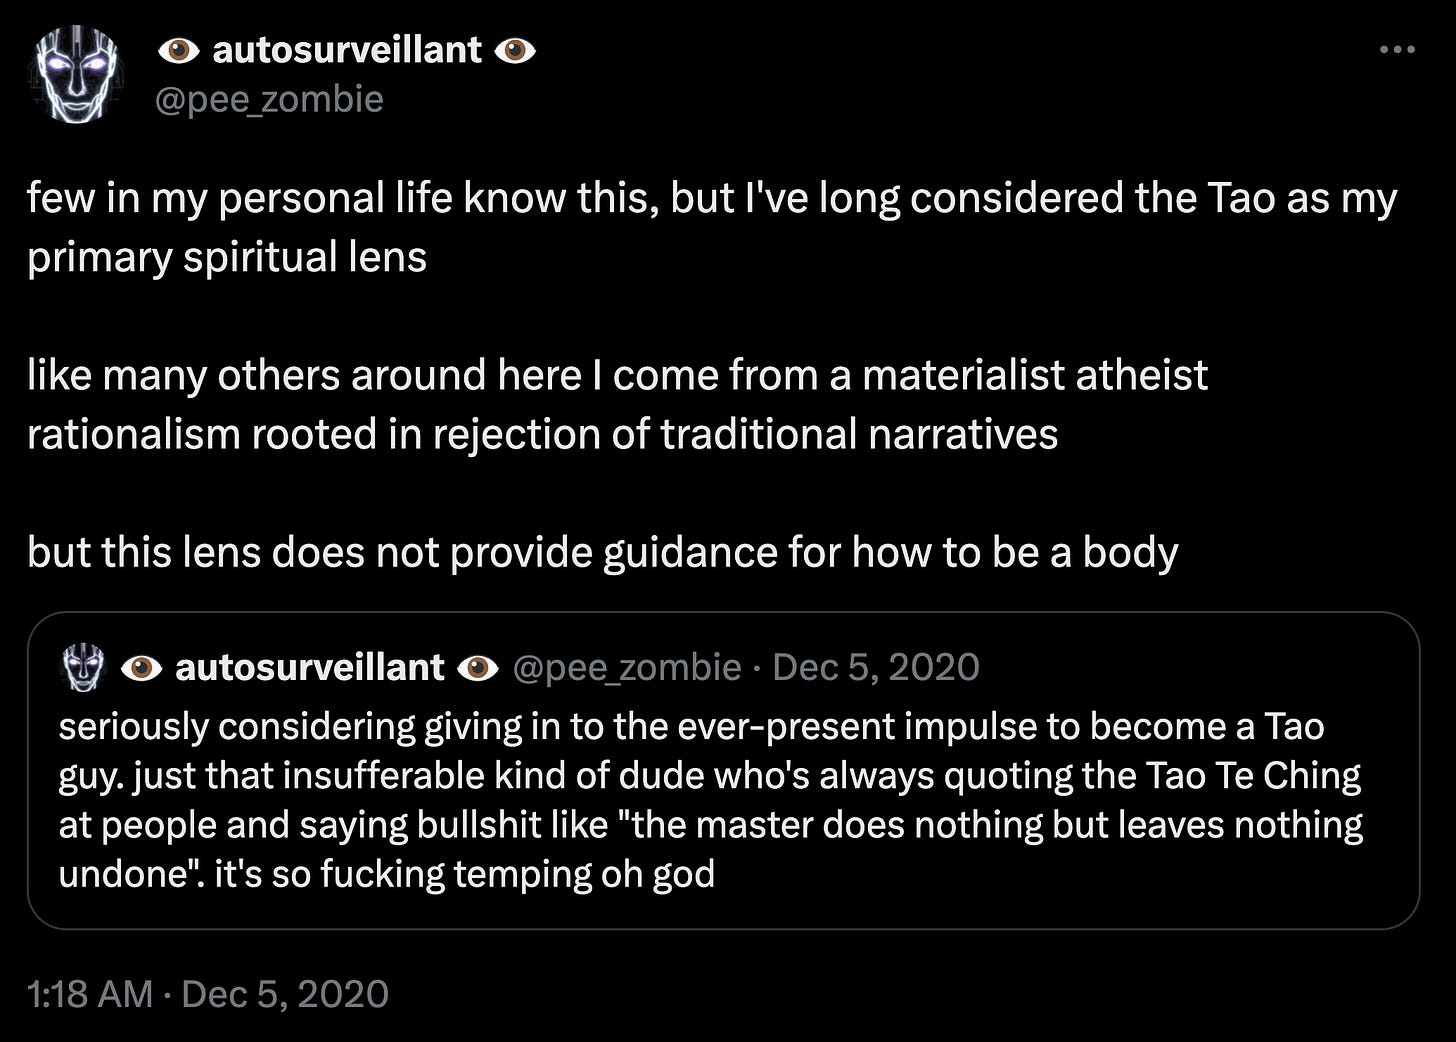 few in my personal life know this, but I've long considered the Tao as my primary spiritual lens  like many others around here I come from a materialist atheist rationalism rooted in rejection of traditional narratives  but this lens does not provide guidance for how to be a body